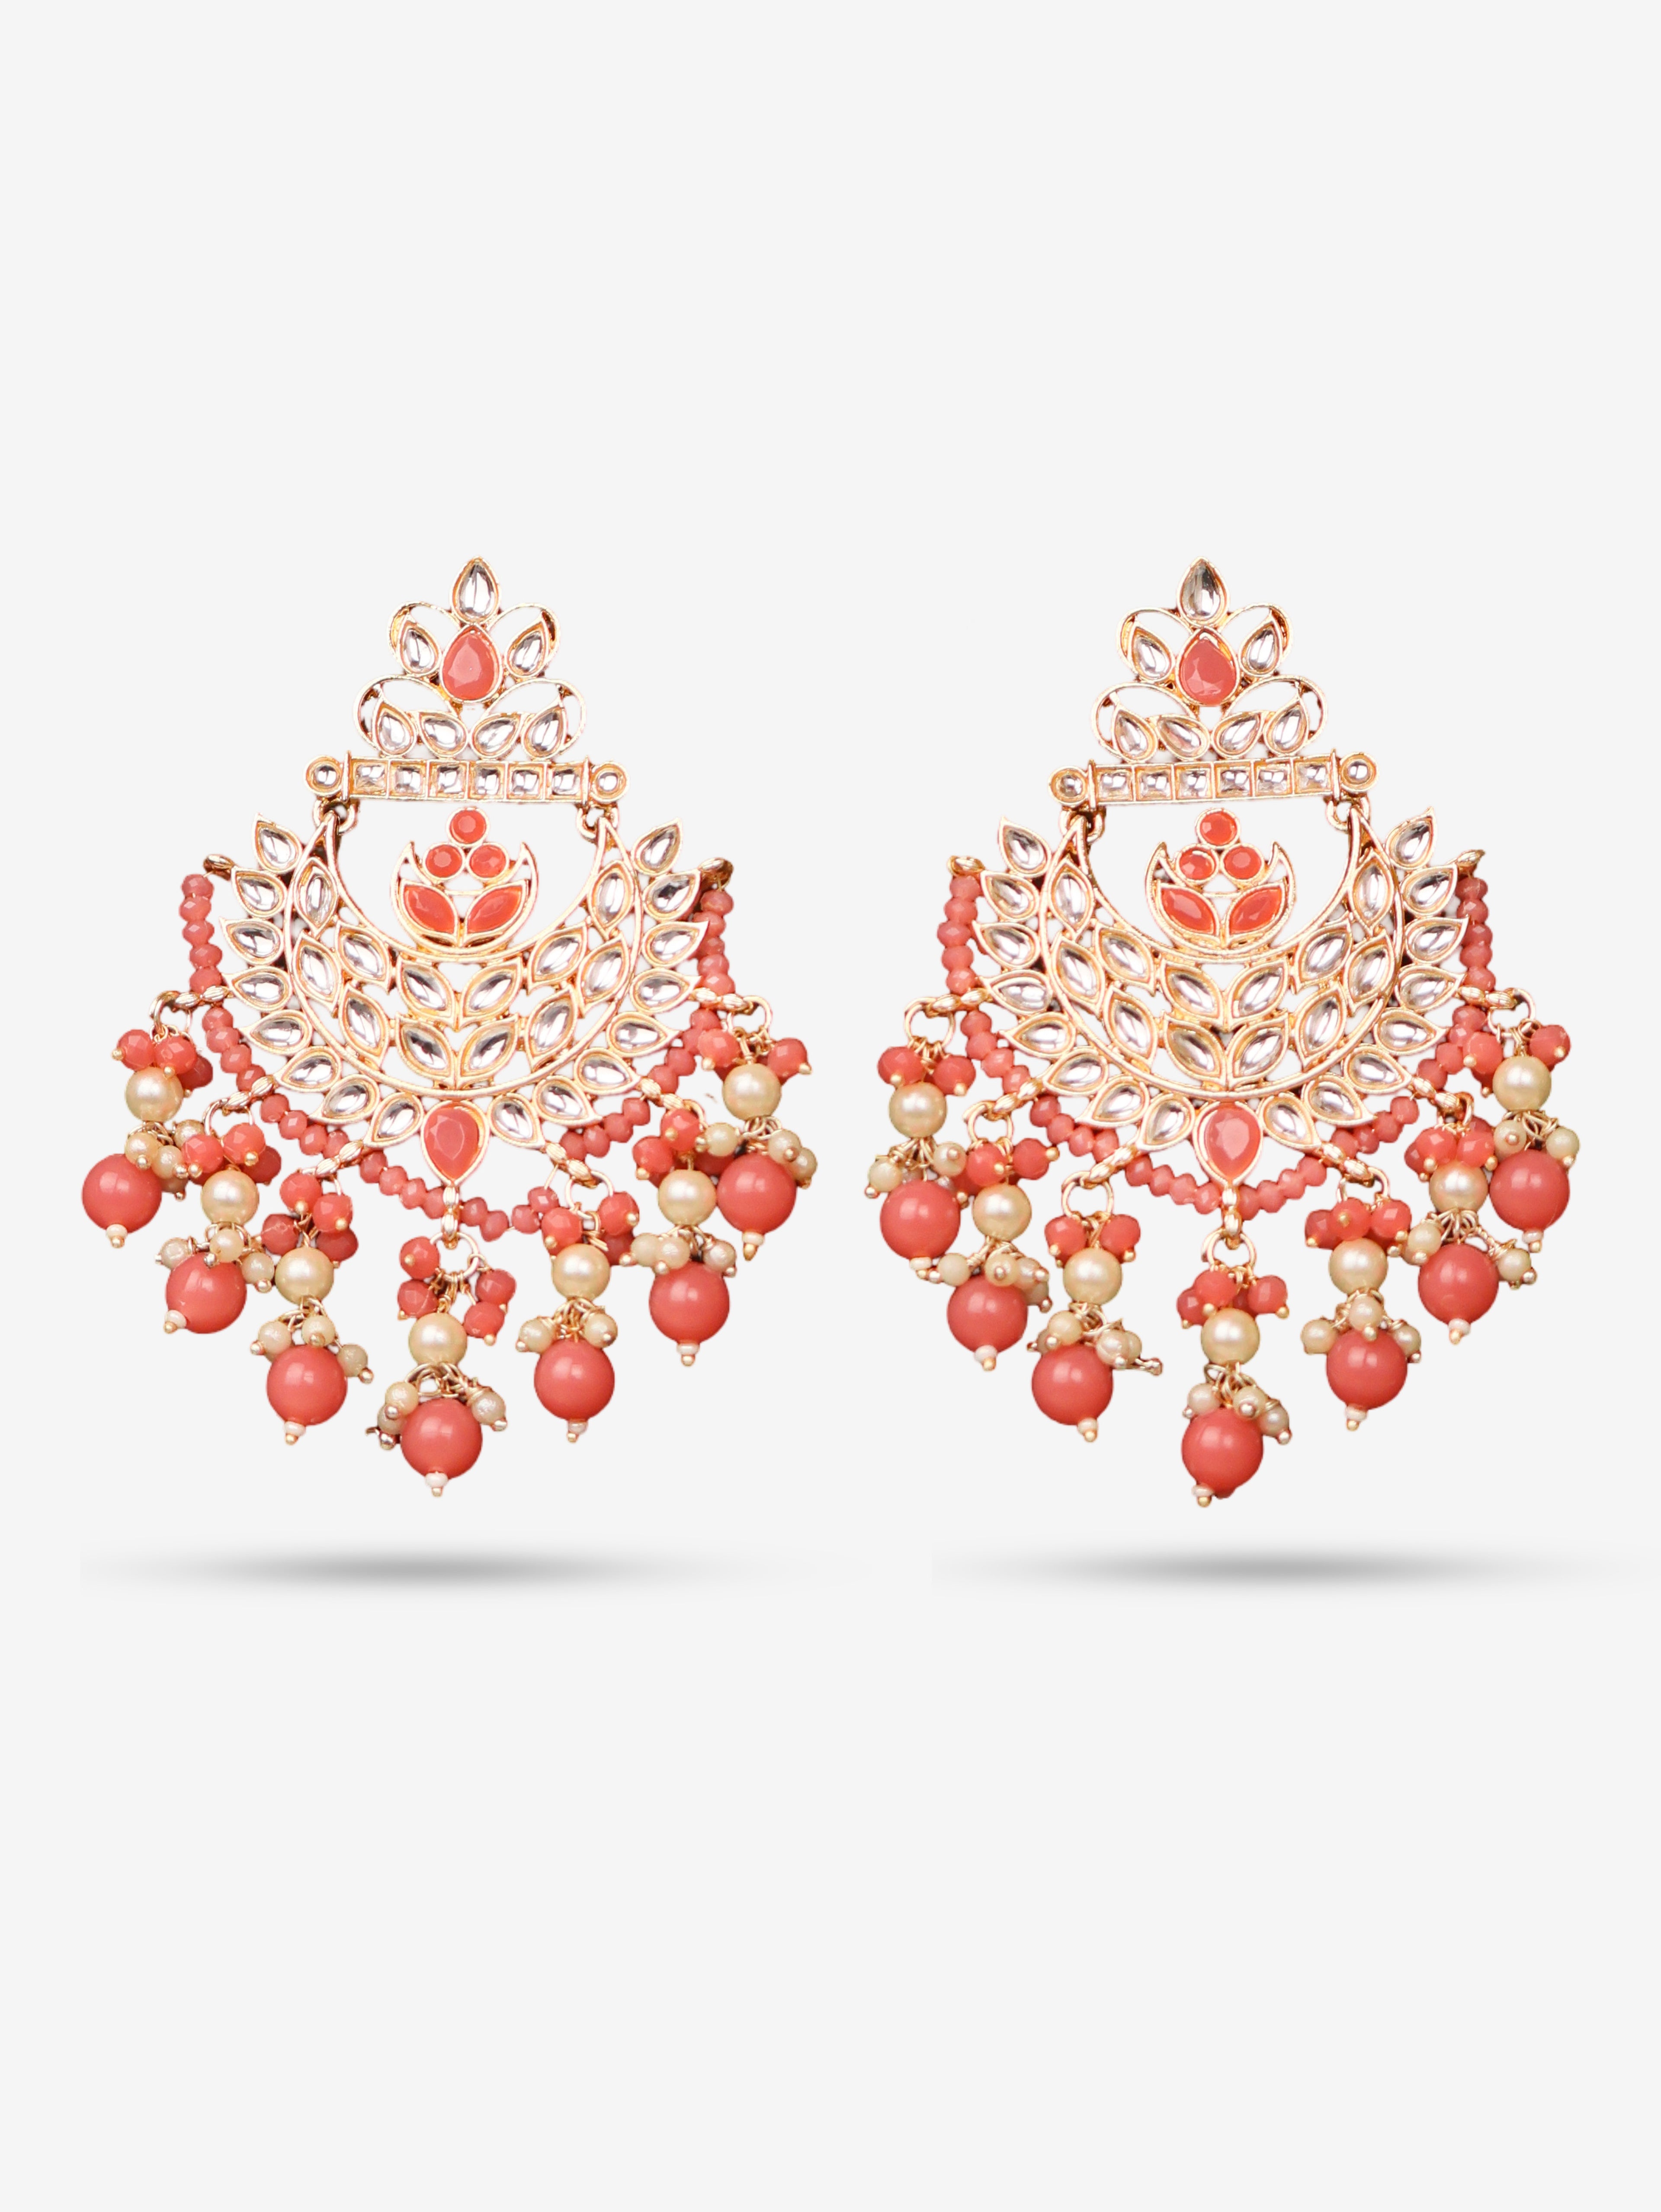 Kundan &amp; Pearl Drop Earrings with Textured Detailing for Women by Shreekama Peach Fashion Jewelry for Party Festival Wedding Occasion in Noida